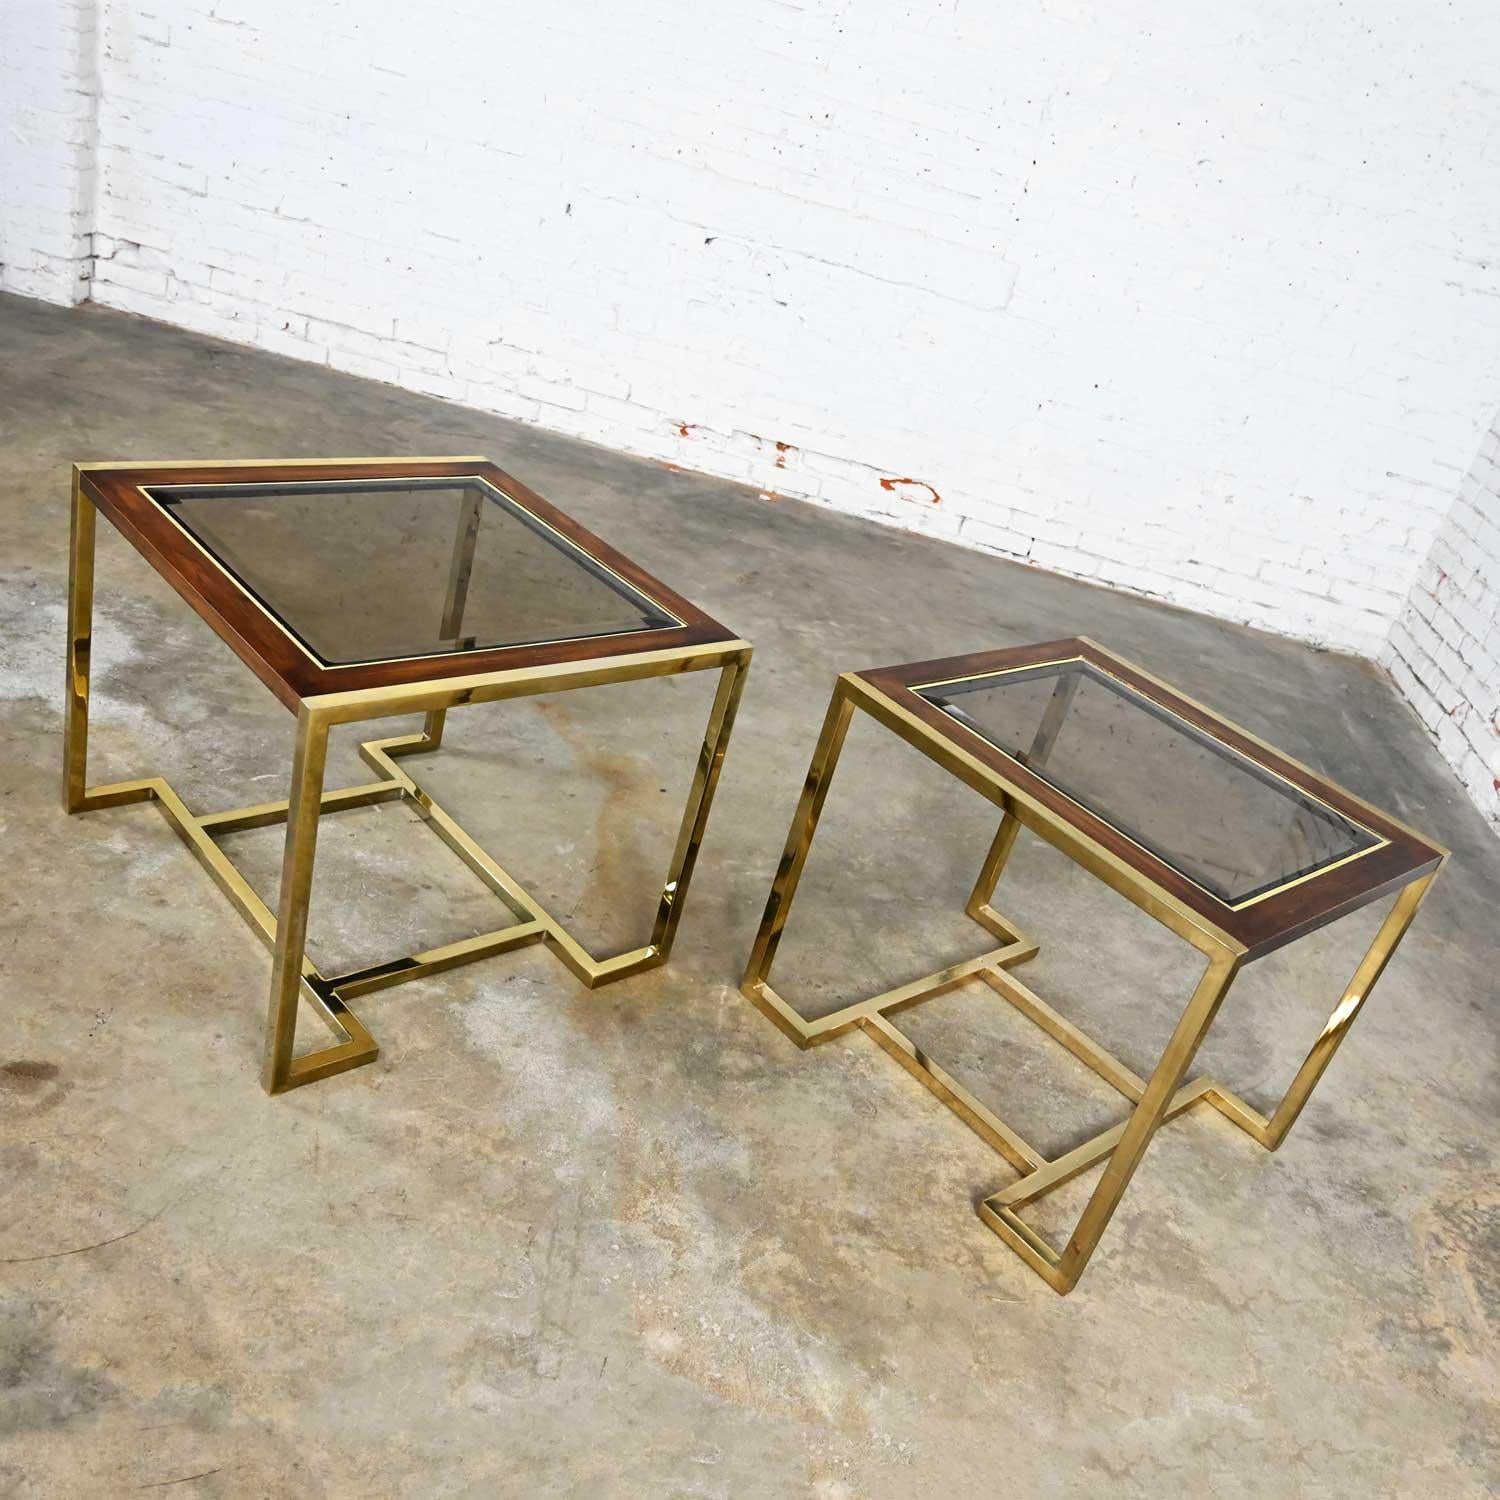 Wonderful pair of modern brass plated dark wood & smoked glass end tables in 2 sizes, 1 larger rectangle and 1 smaller rectangle. Comprised of polished brass plate frames with a top of dark wood and beveled smoked glass inserts, by Thomasville